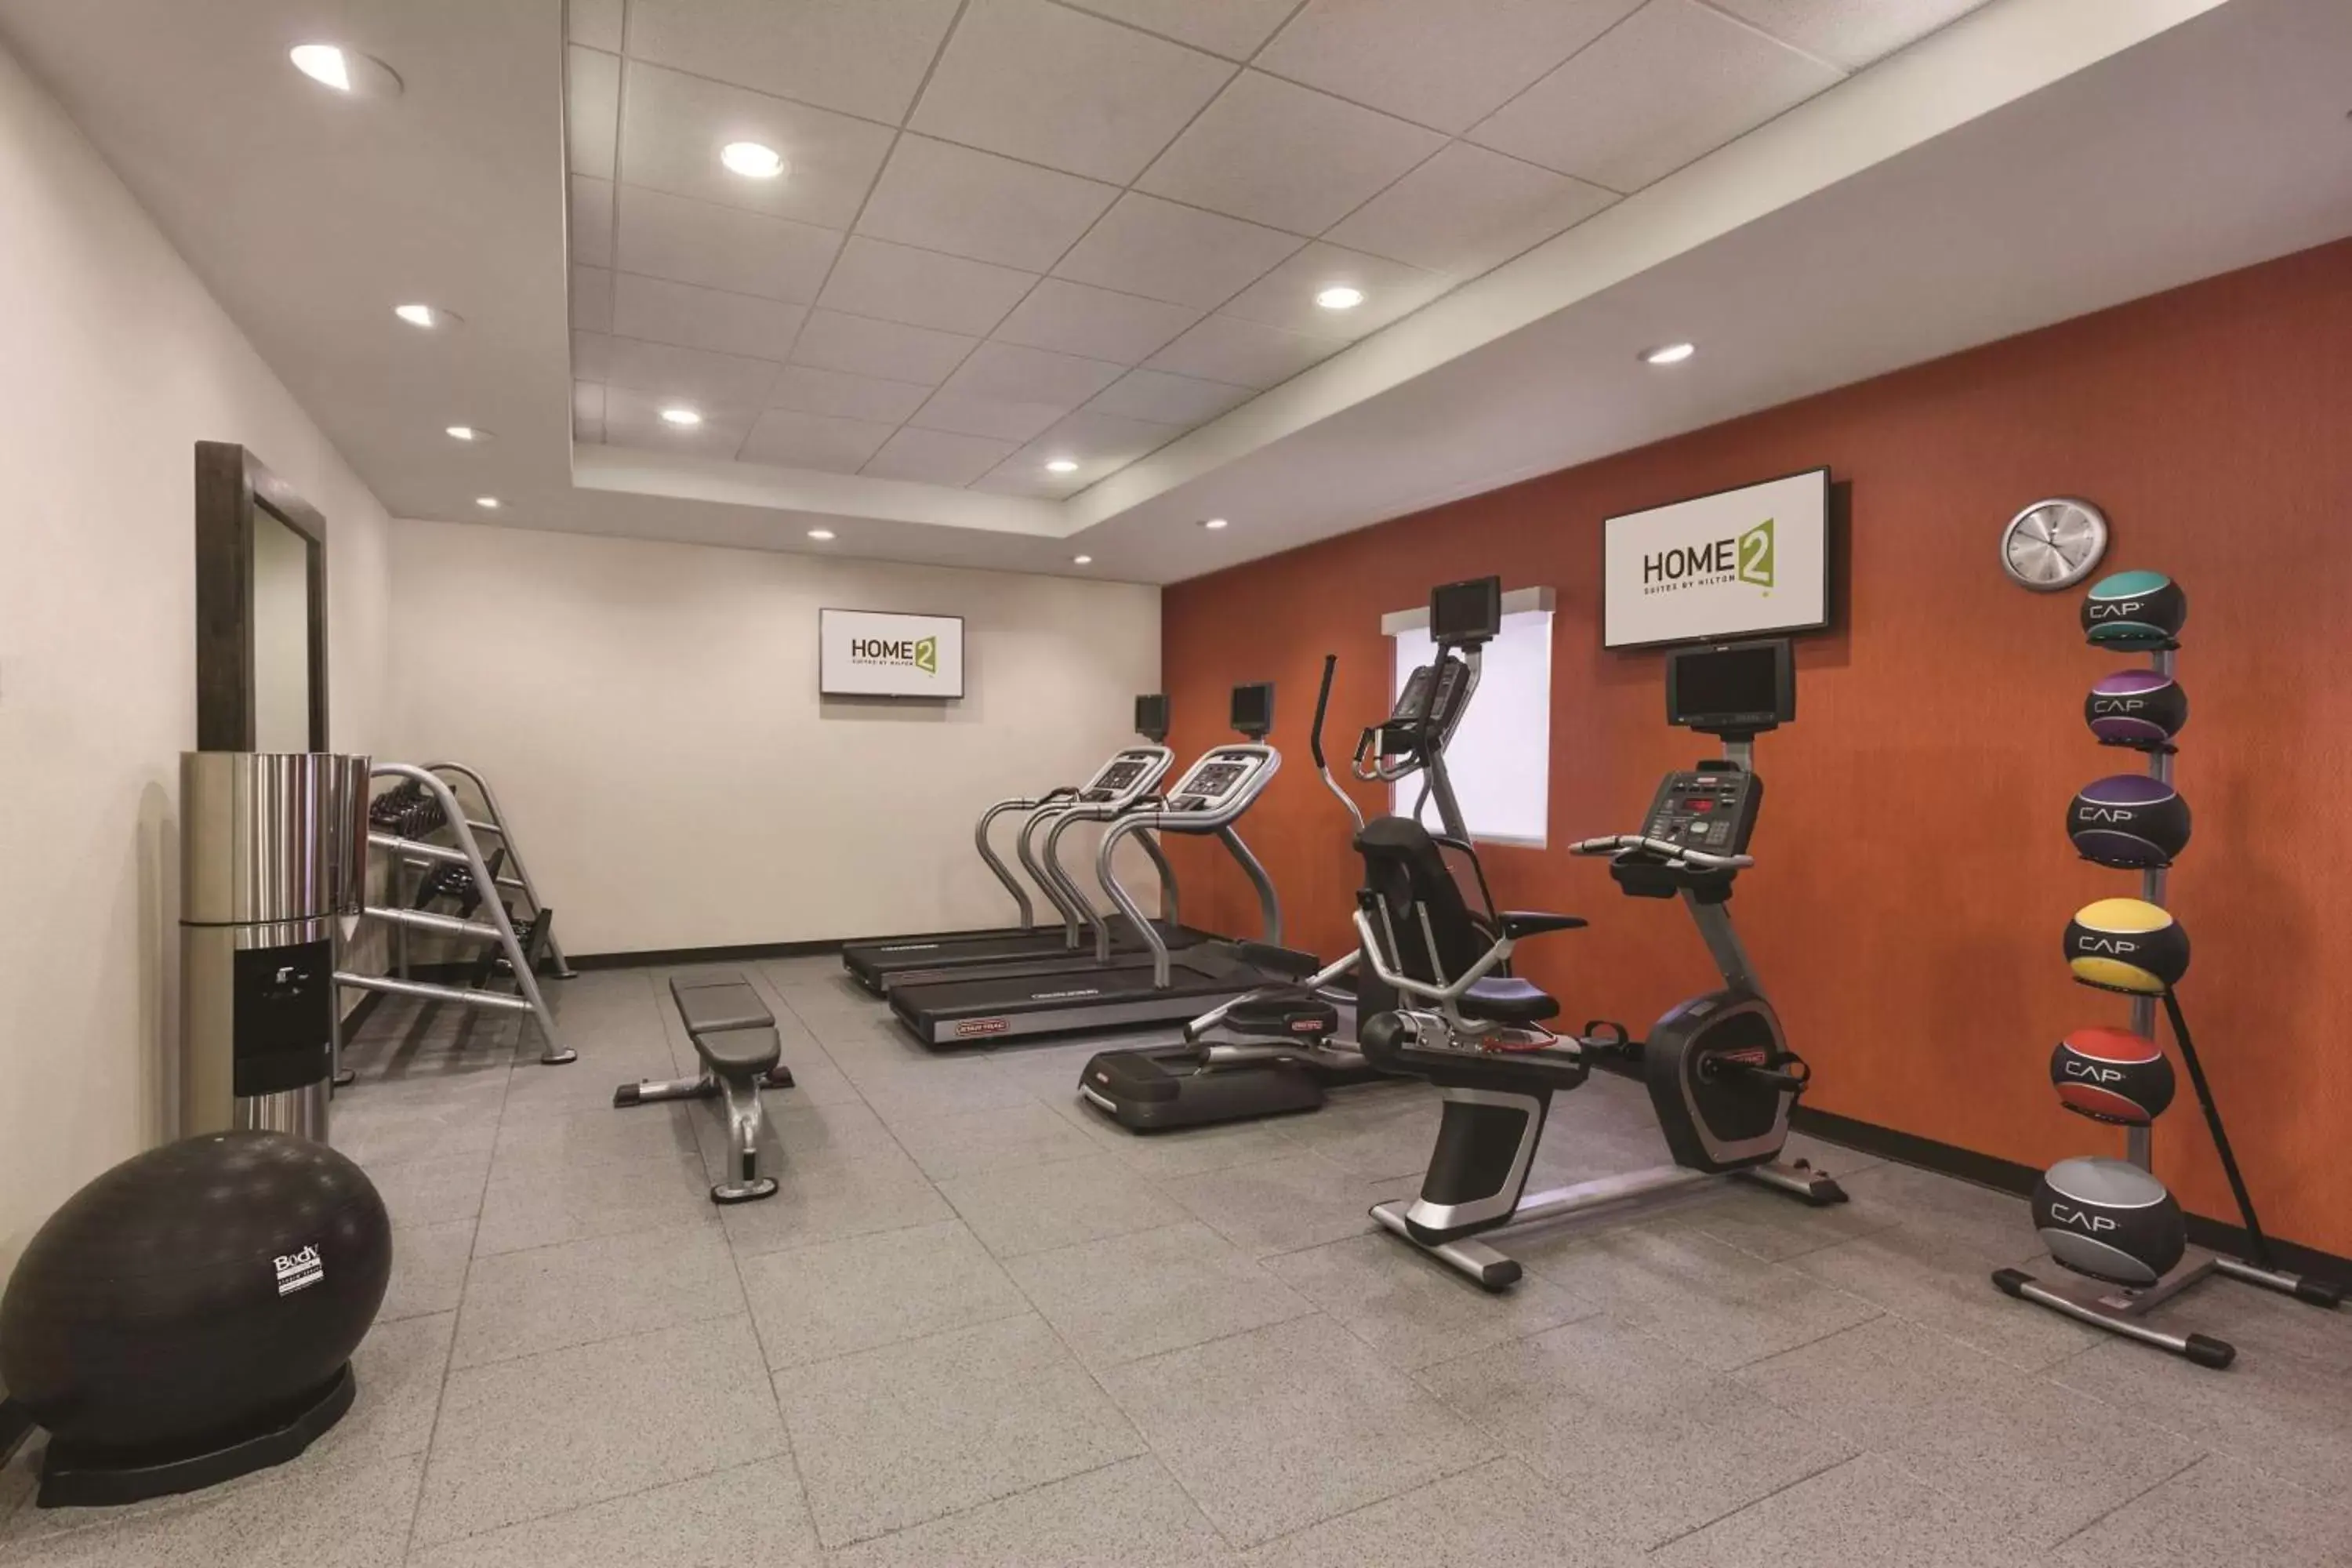 Fitness centre/facilities, Fitness Center/Facilities in Home2 Suites by Hilton College Station